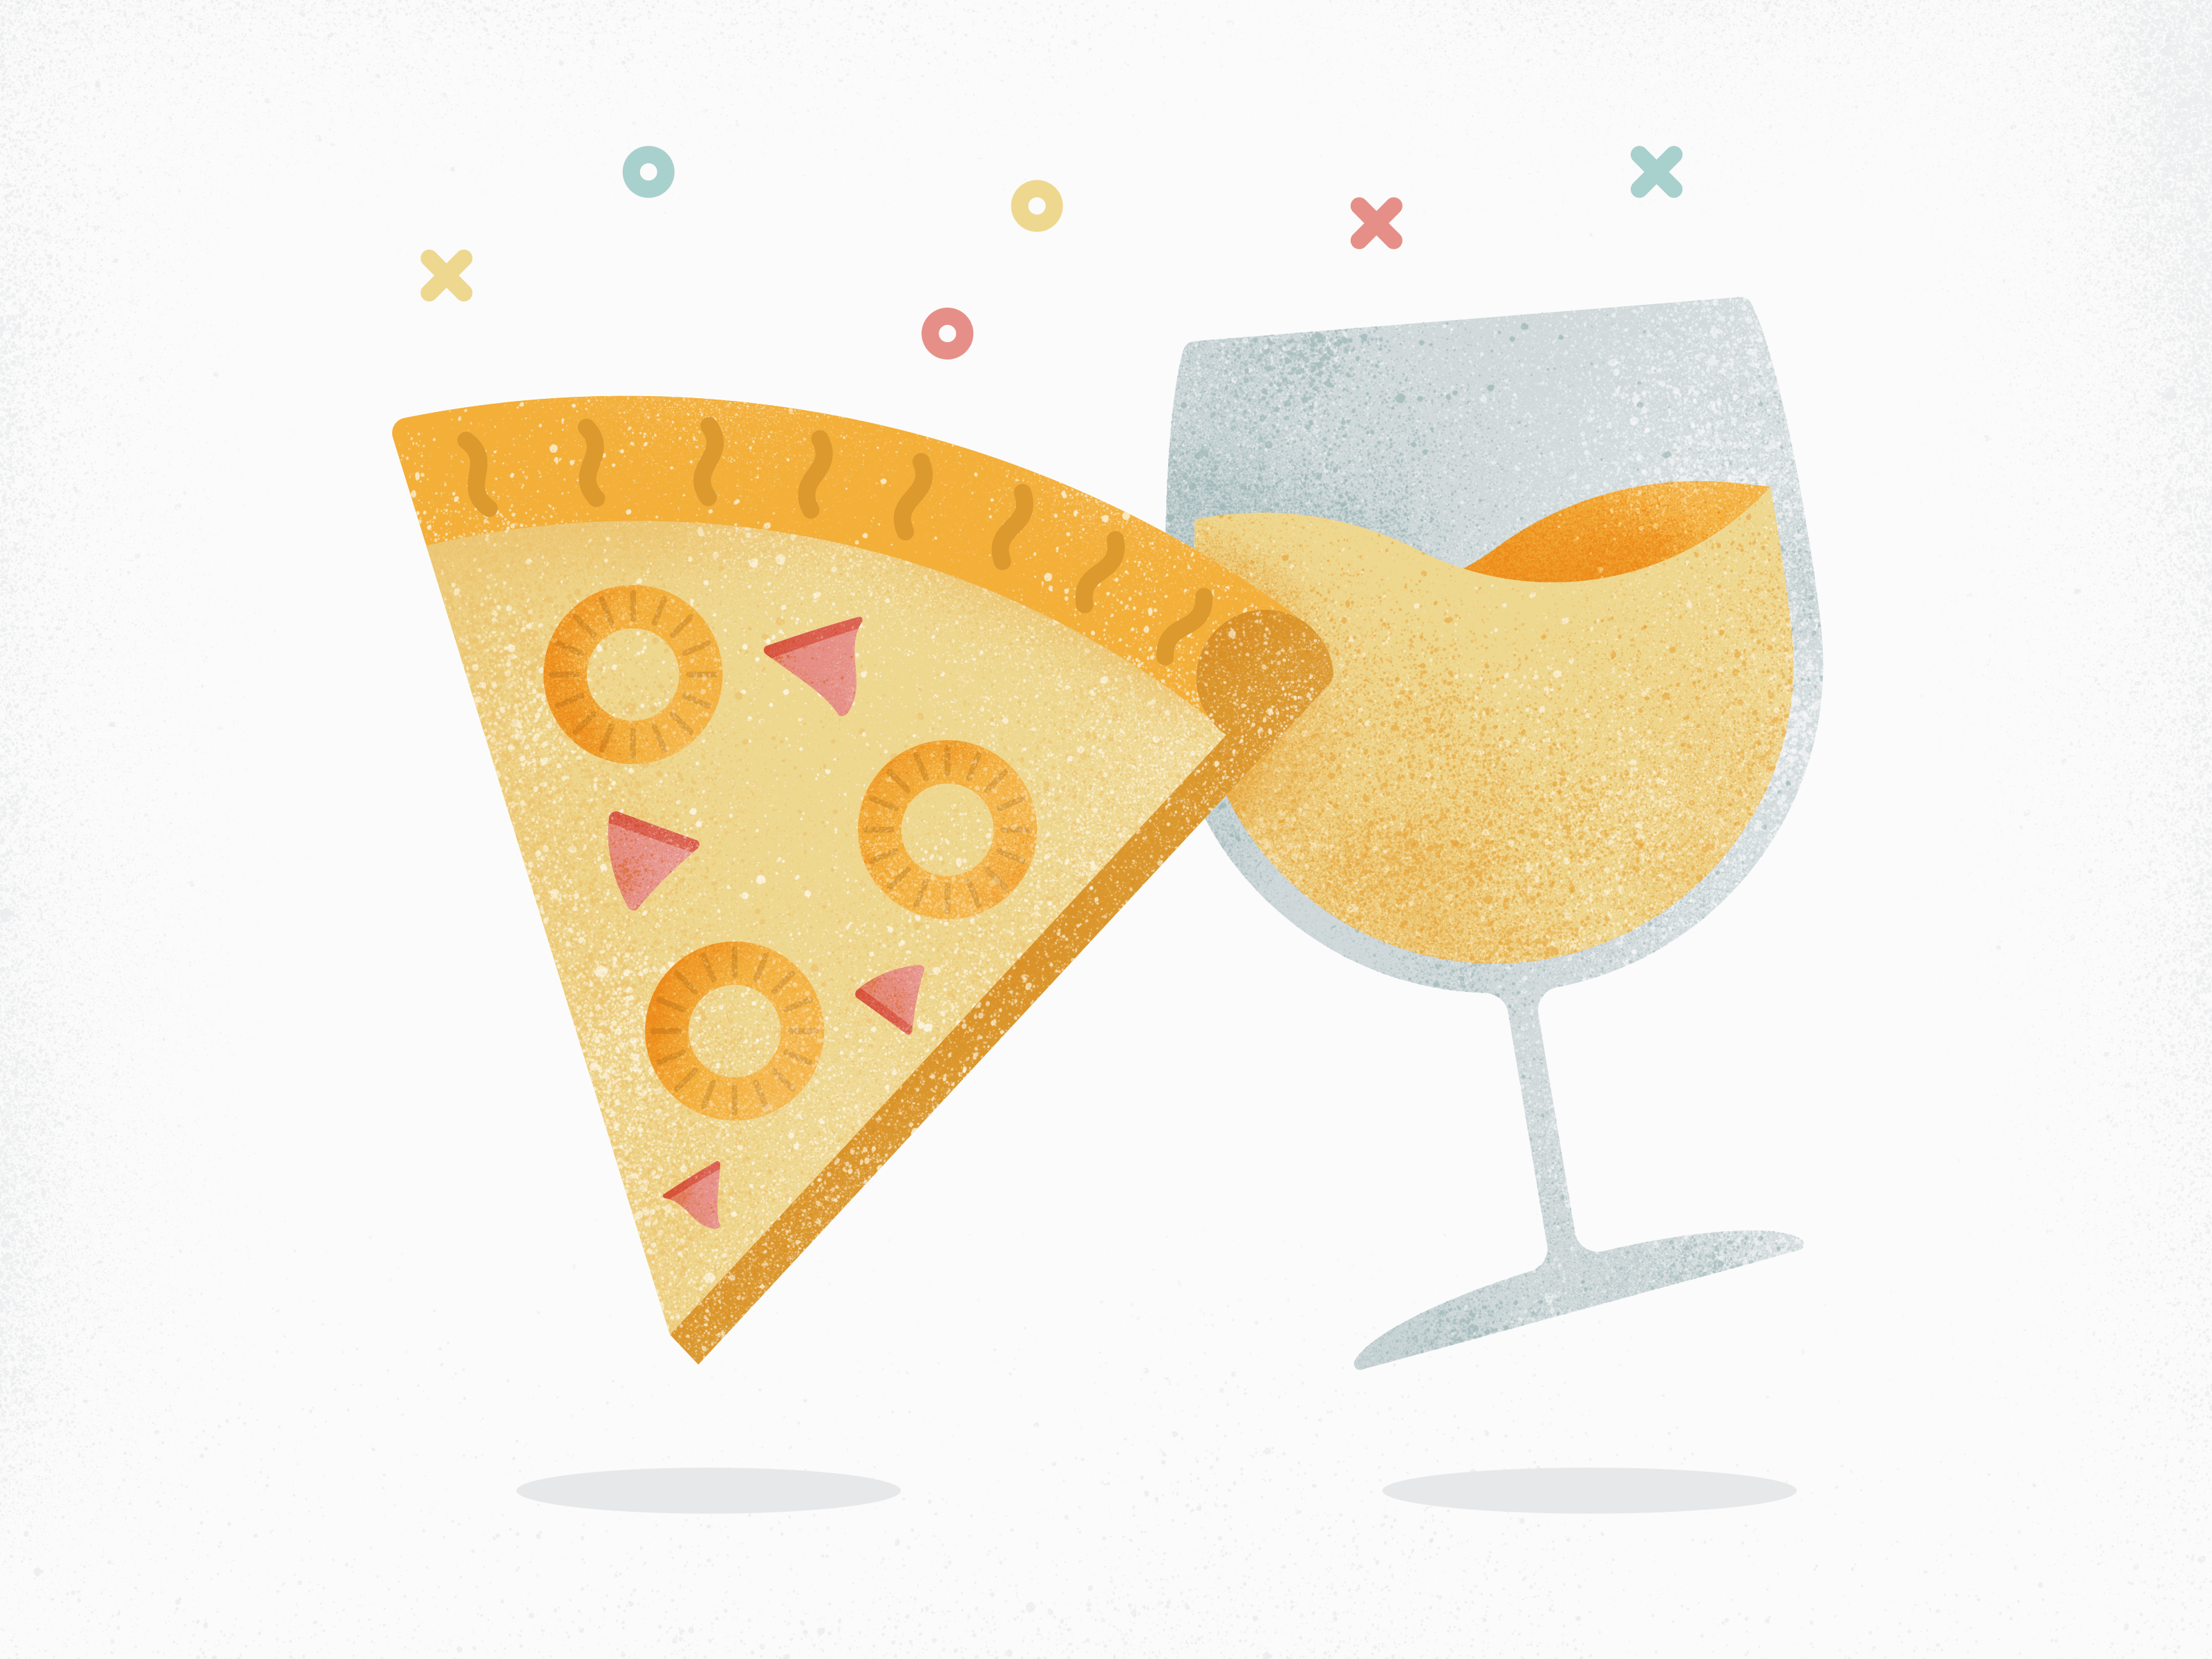 Pizza and Wine by Clint Hess for Siege Media on Dribbble